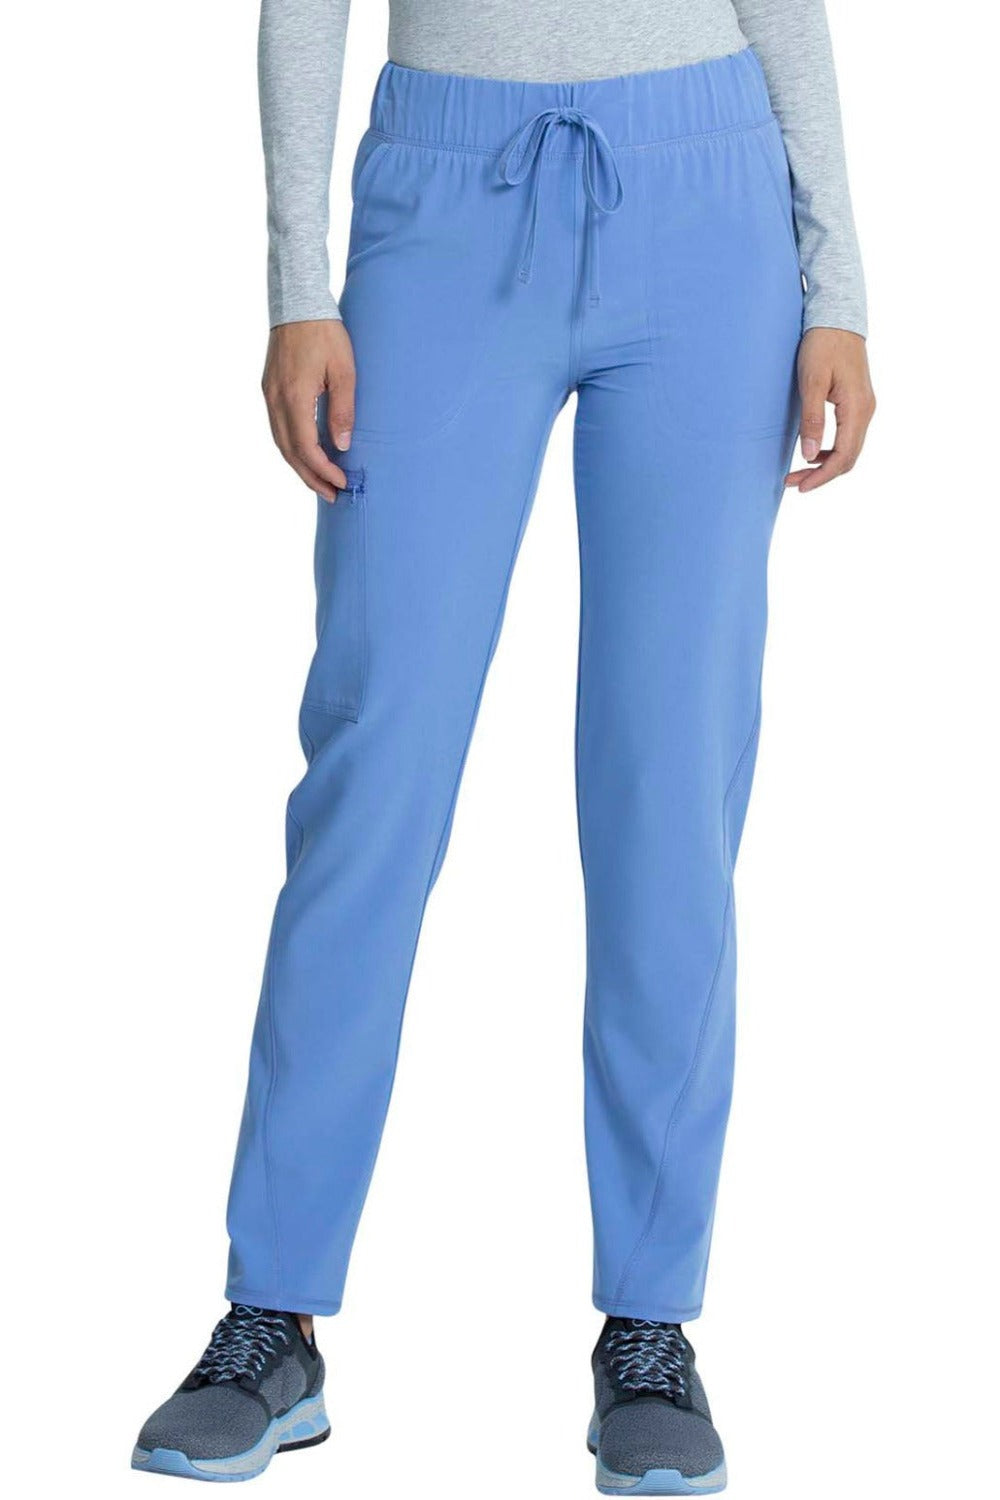 Cherokee Allura Tall Scrub Pant Mid Rise Tapered Leg Drawstring in Ciel at Parker's Clothing and Shoes.